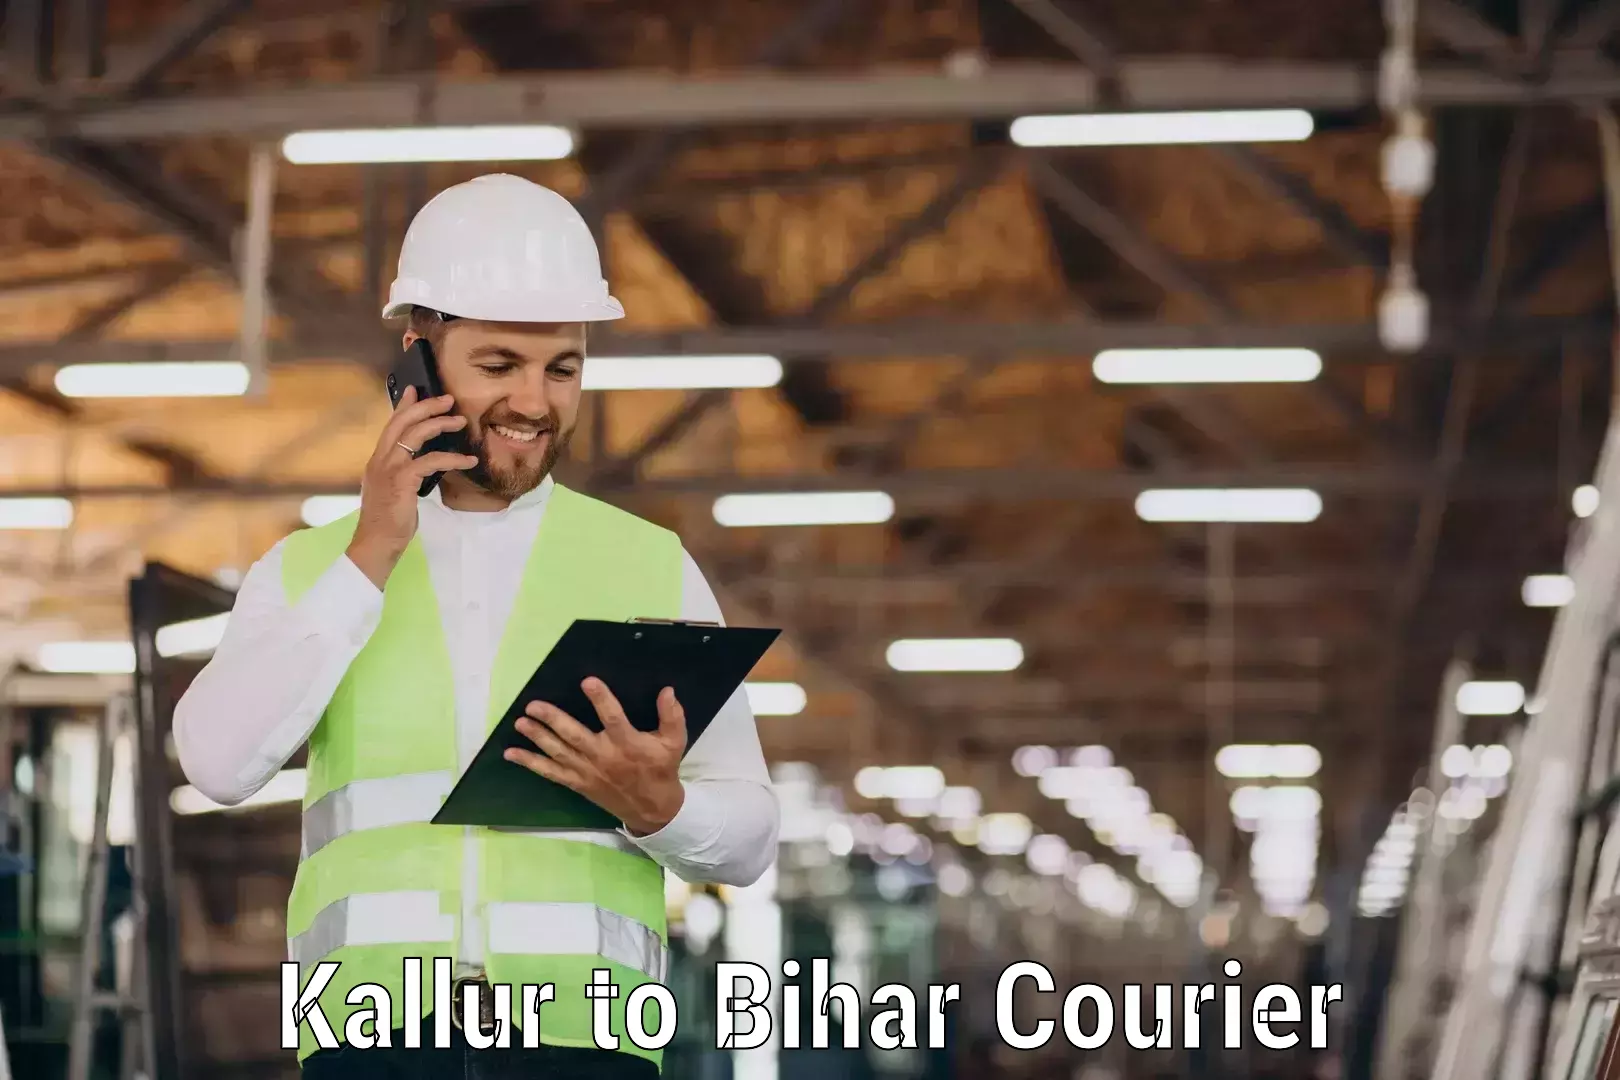 Online courier booking Kallur to Dhaka